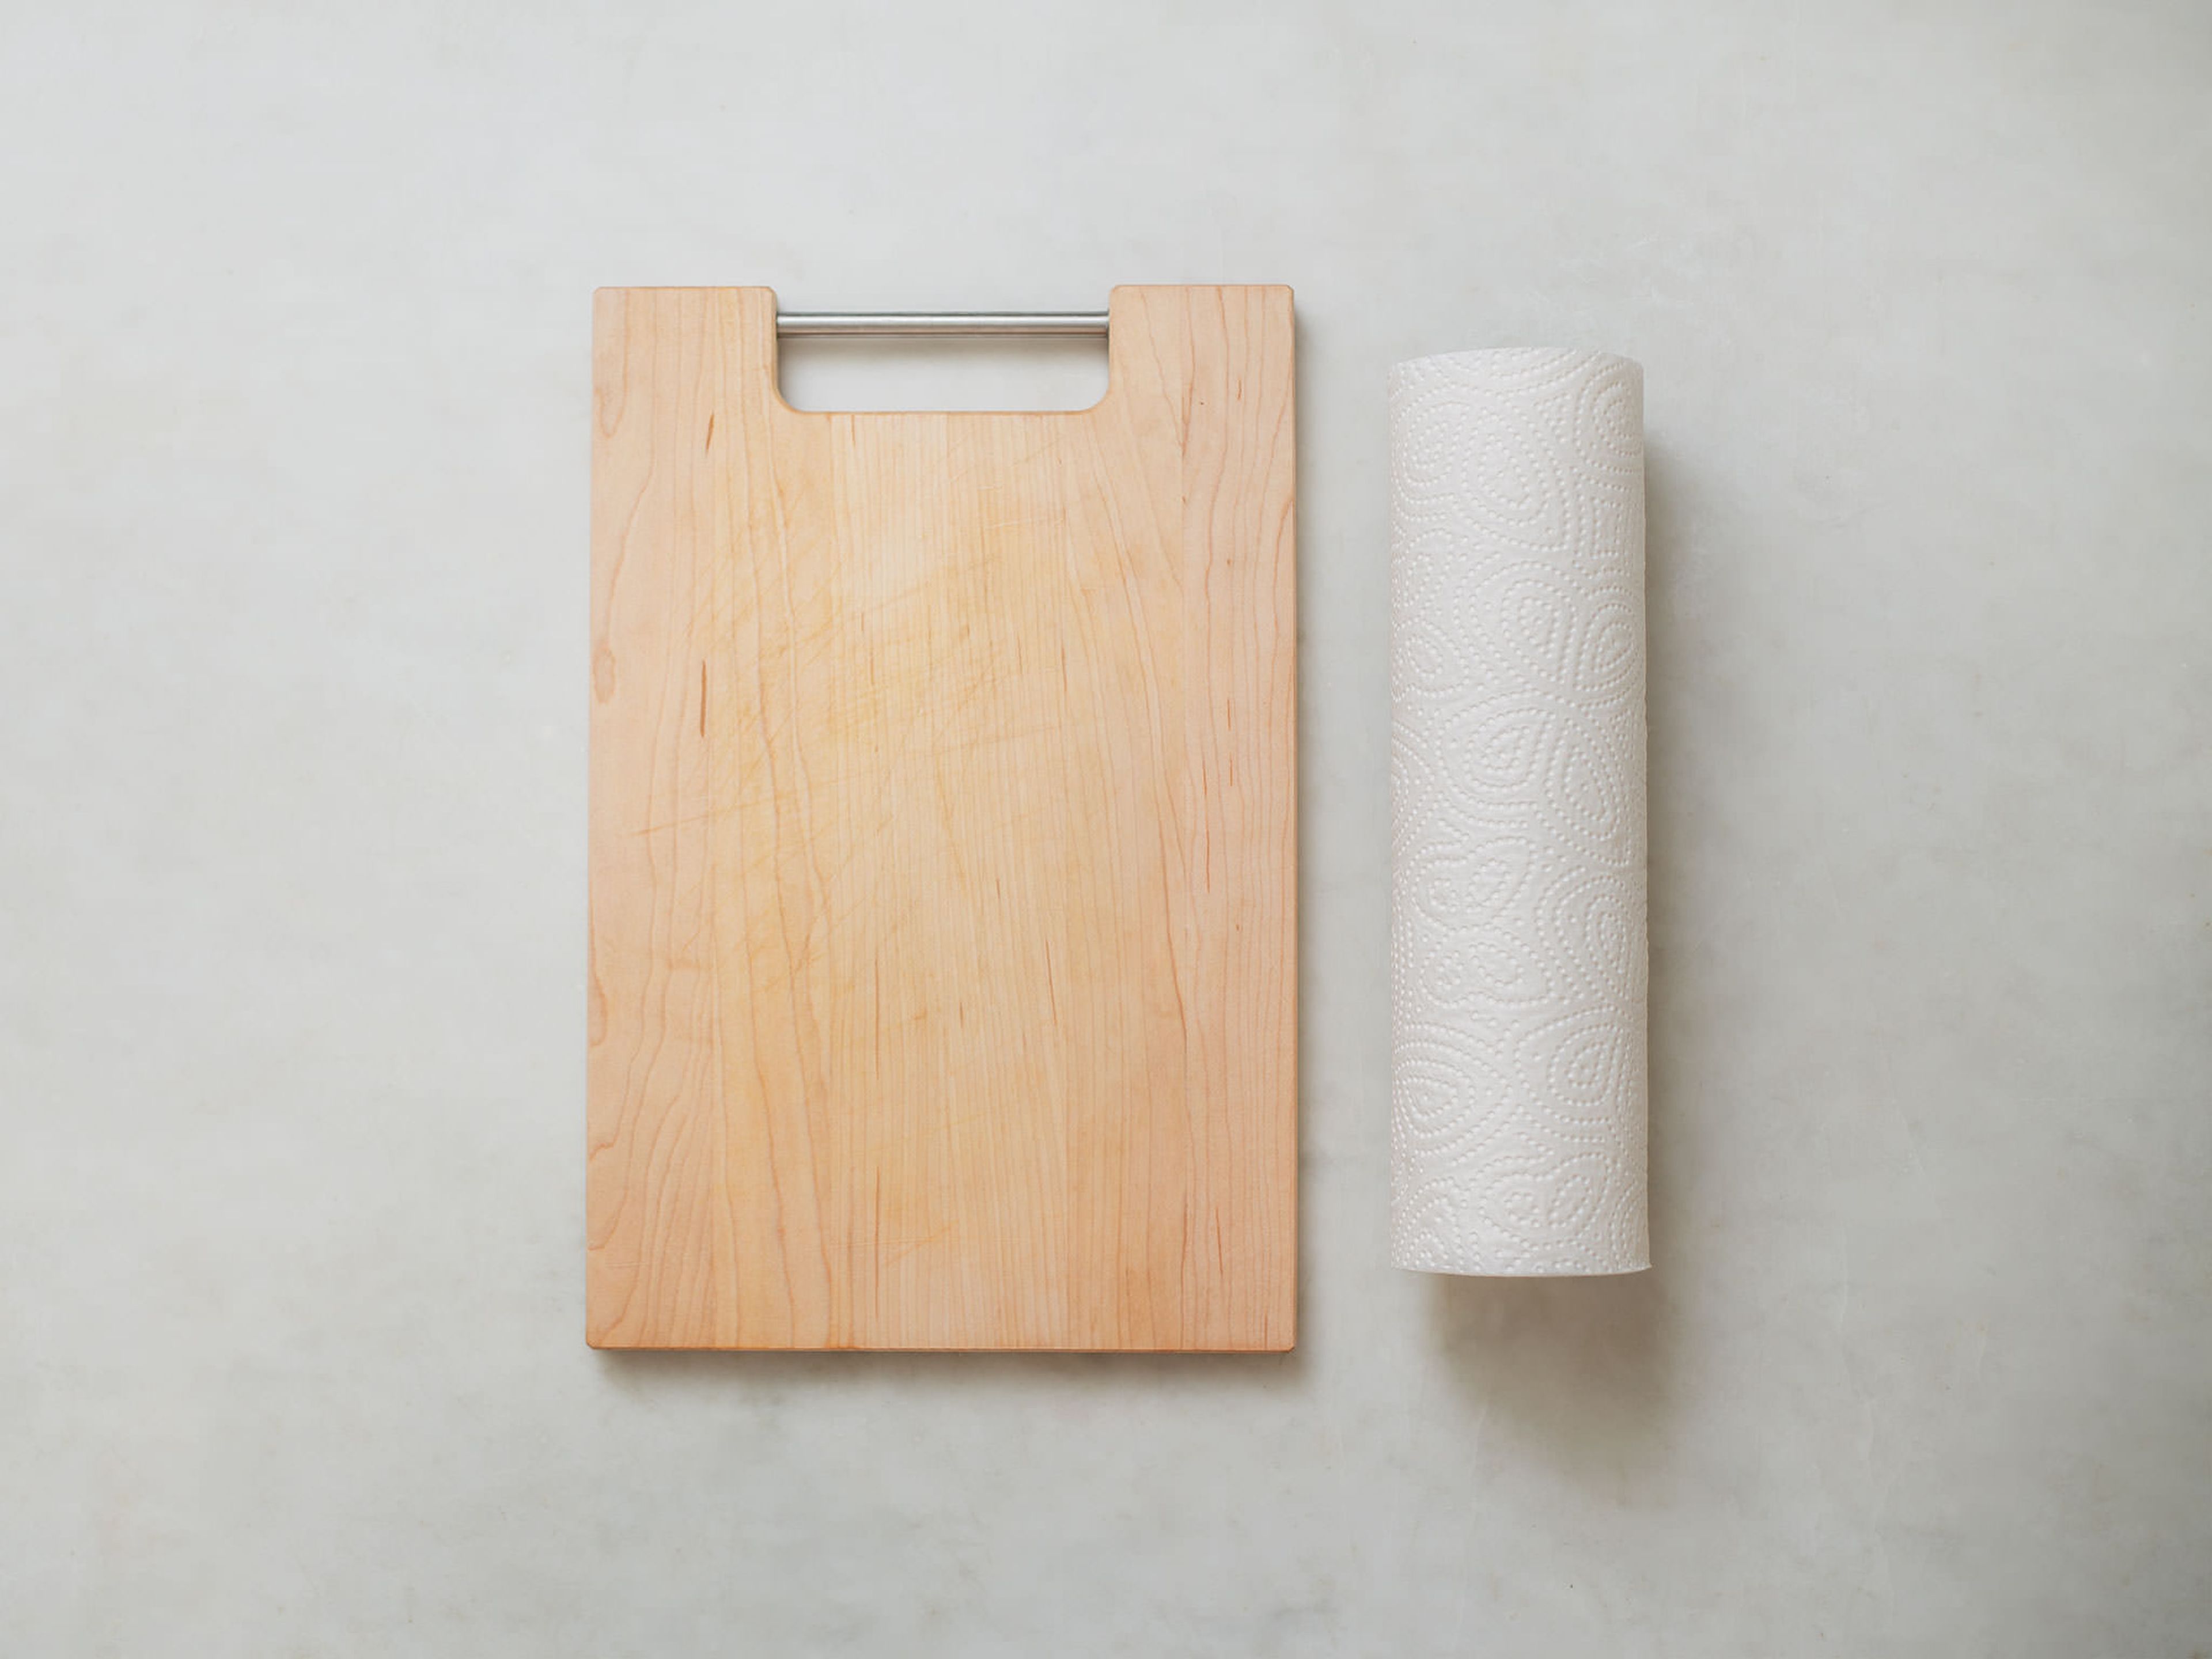 How to secure a cutting board